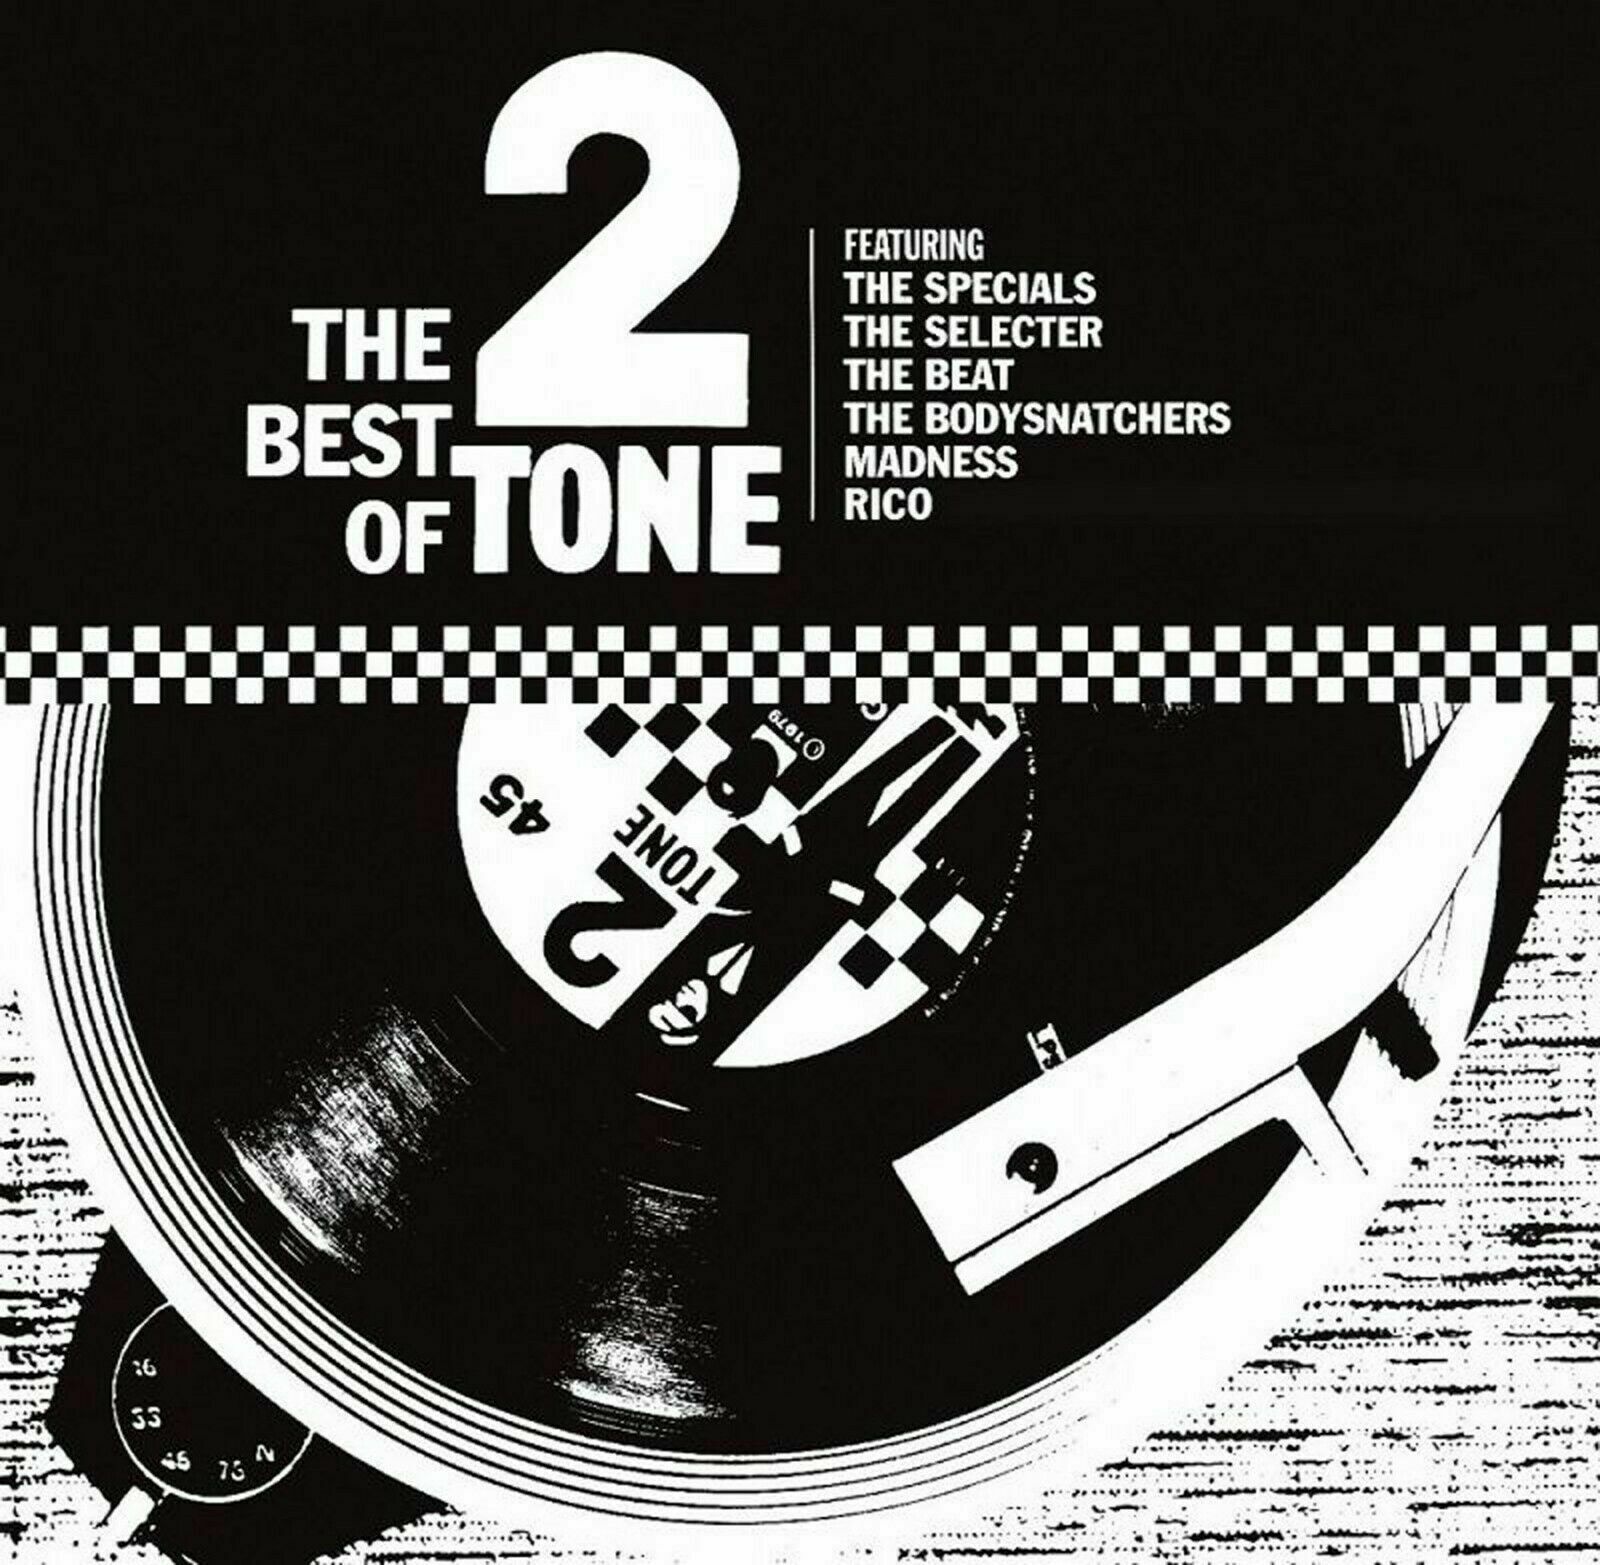 2-TONE - The Best Of 2 Tone - 2 X LP New & Factory Sealed